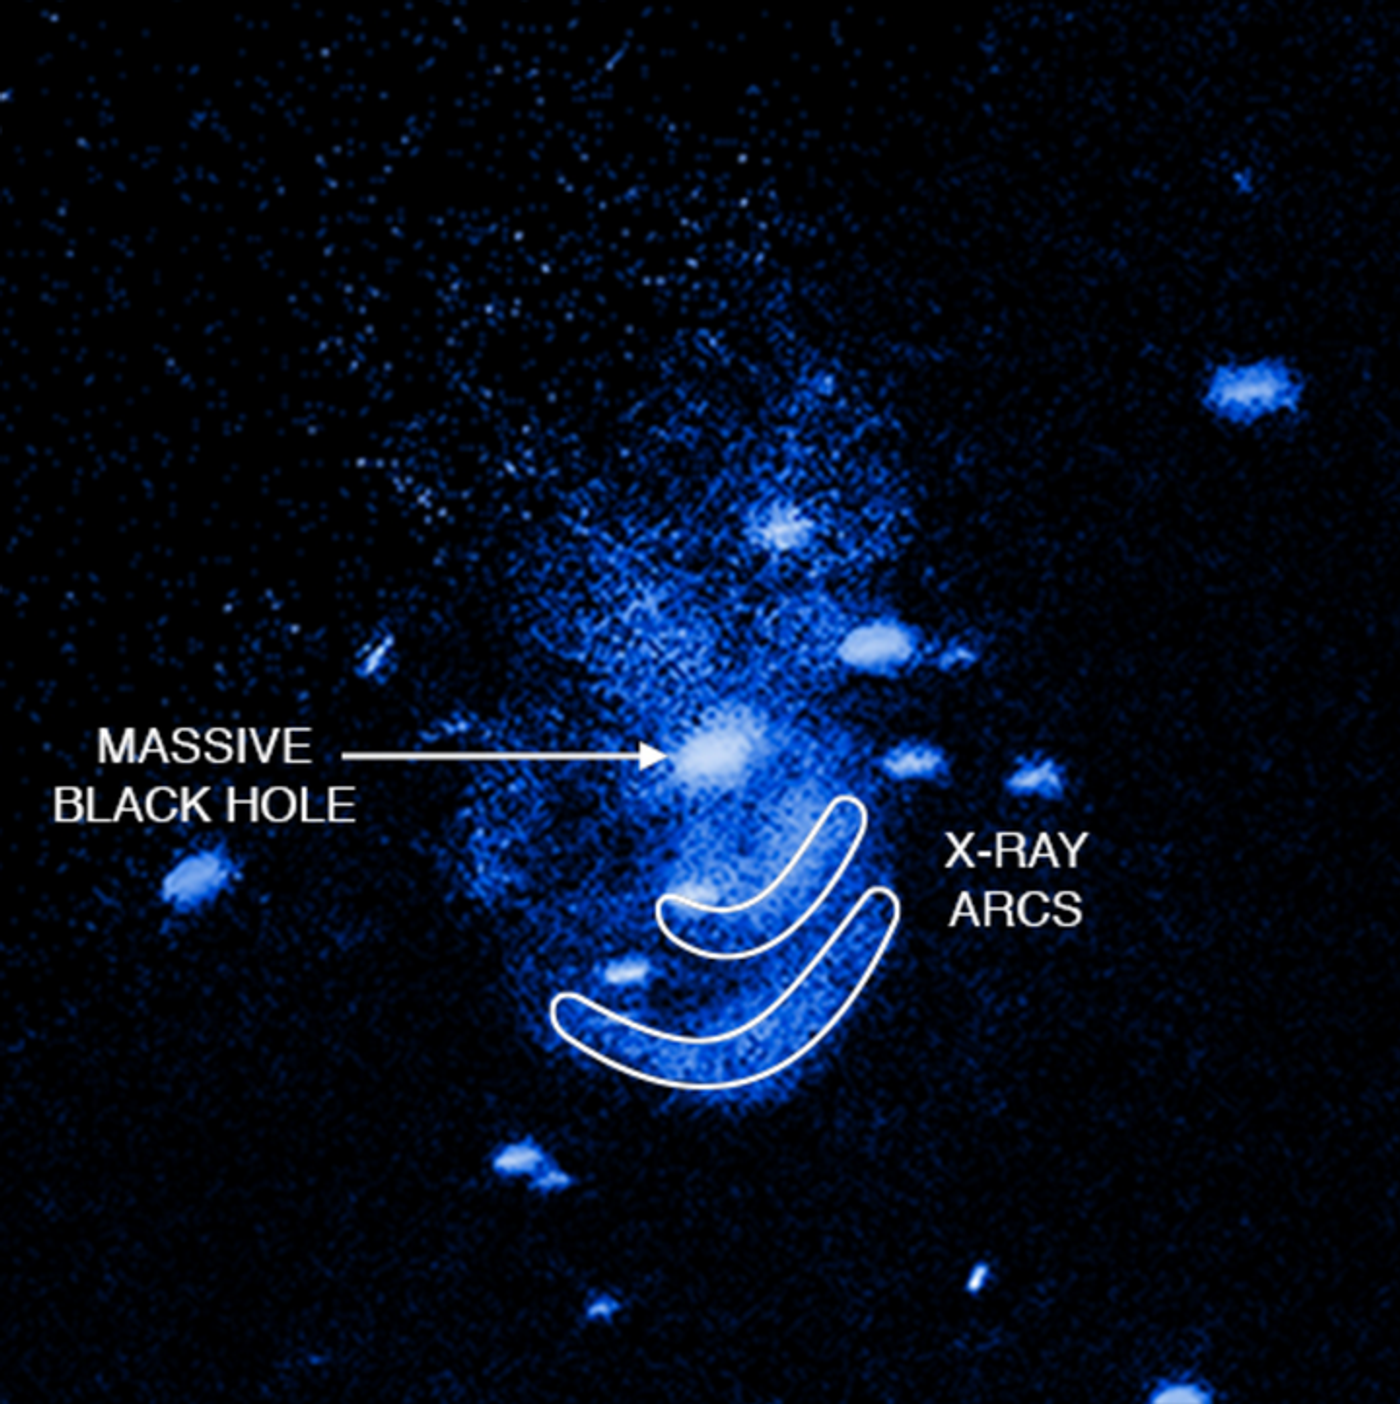 A black hole has been observed burping gasses after it consumed matter.